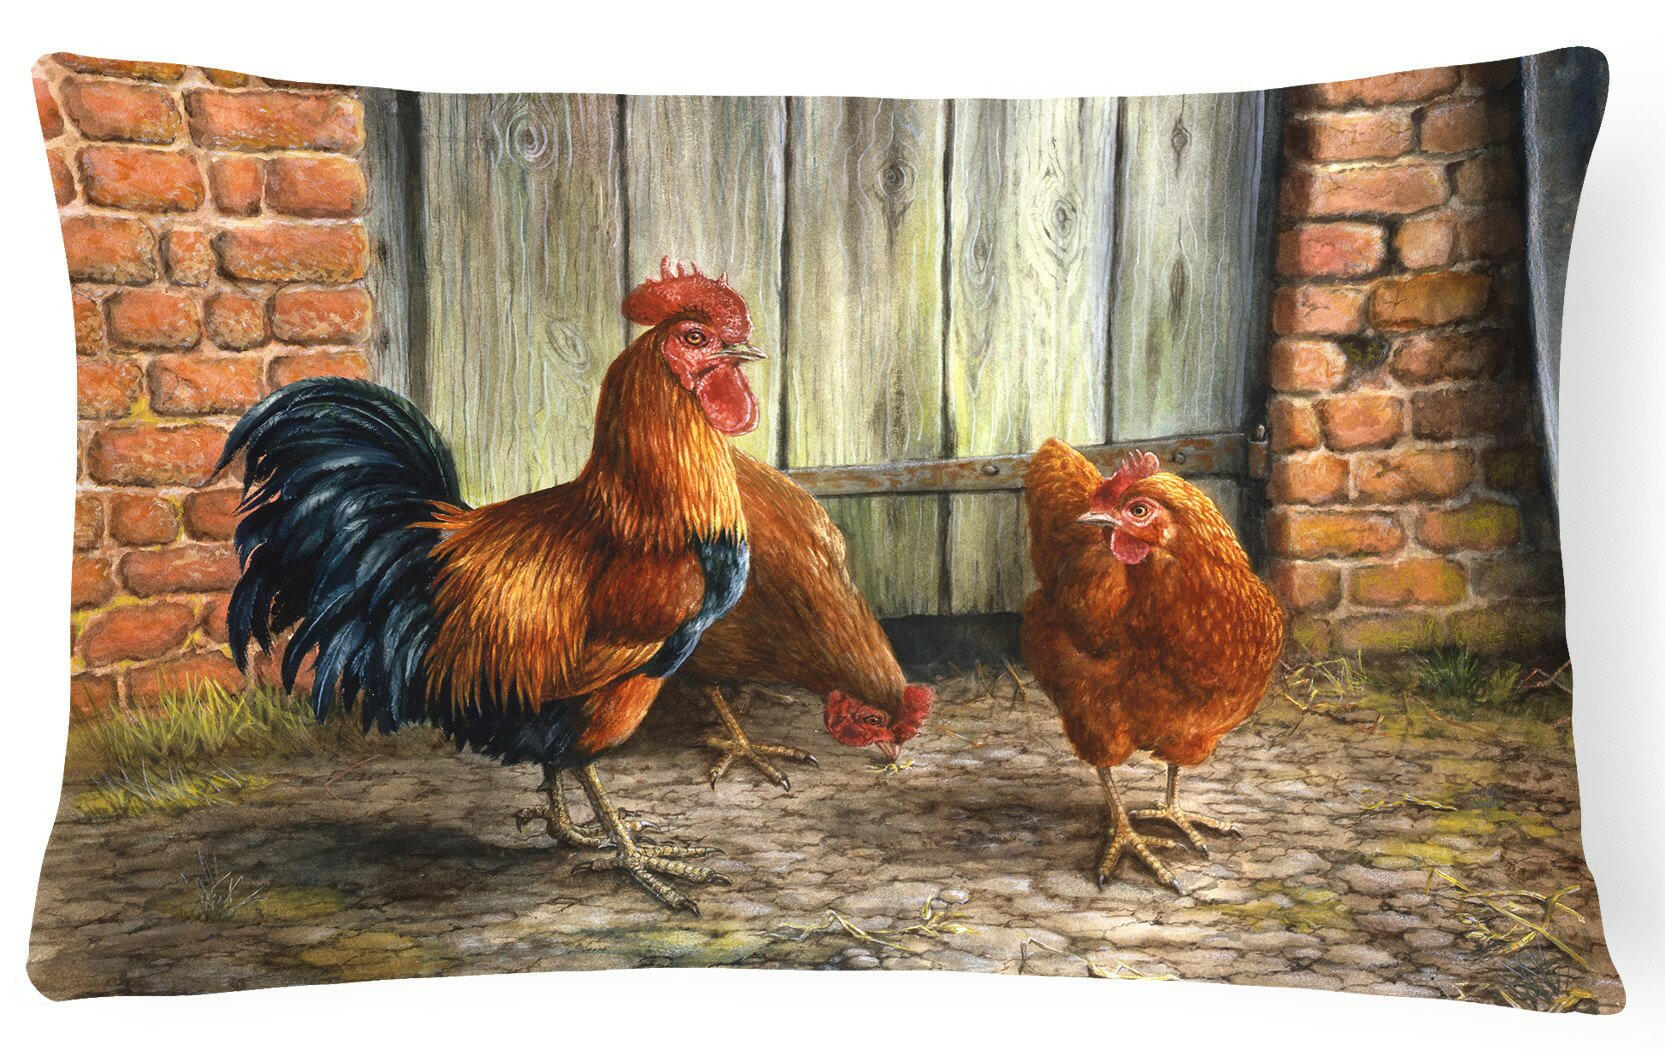 Rooster and Chickens by Daphne Baxter Fabric Decorative Pillow BDBA0056PW1216 by Caroline's Treasures